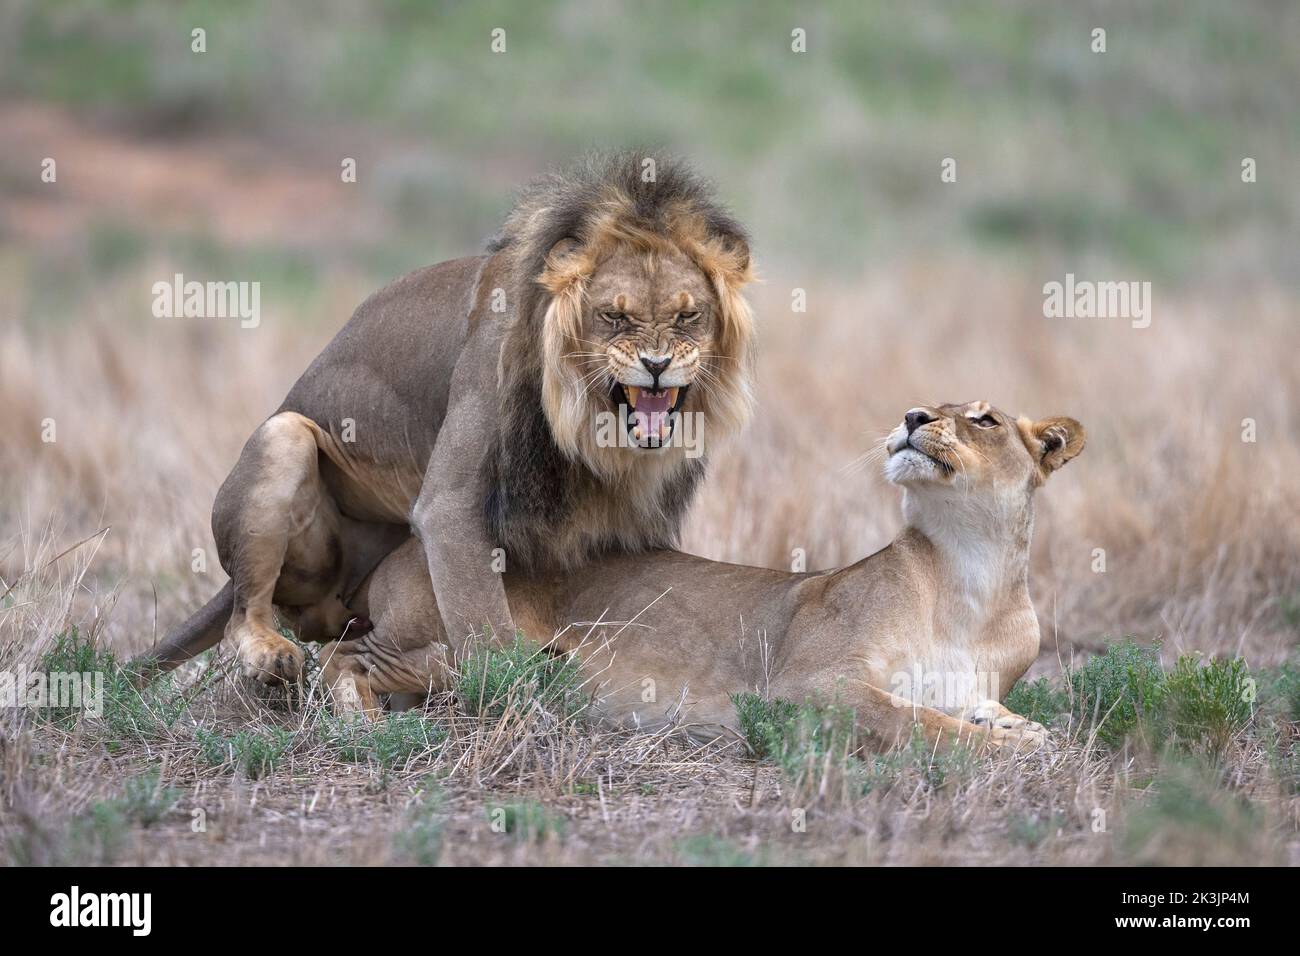 Lions (Panthera leo) mating, Kgalagadi transfrontier park, Northern Cape, South Africa Stock Photo